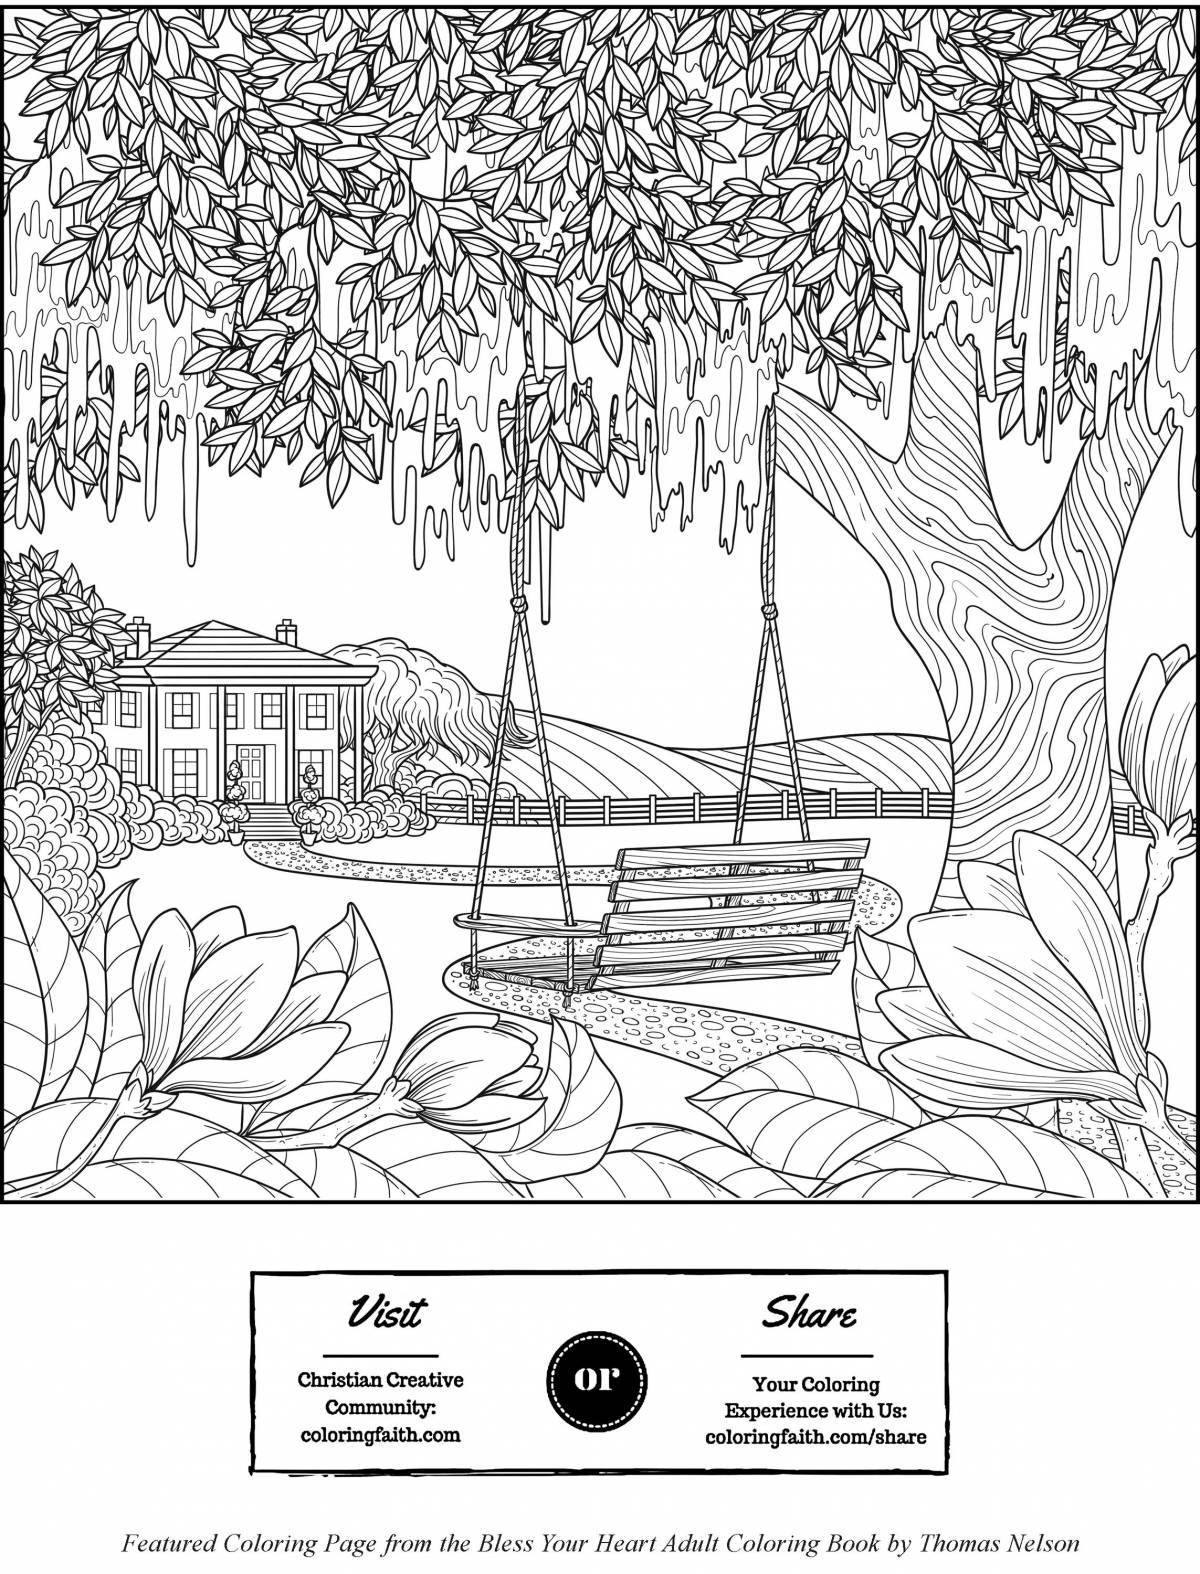 Great landscape coloring book for adults